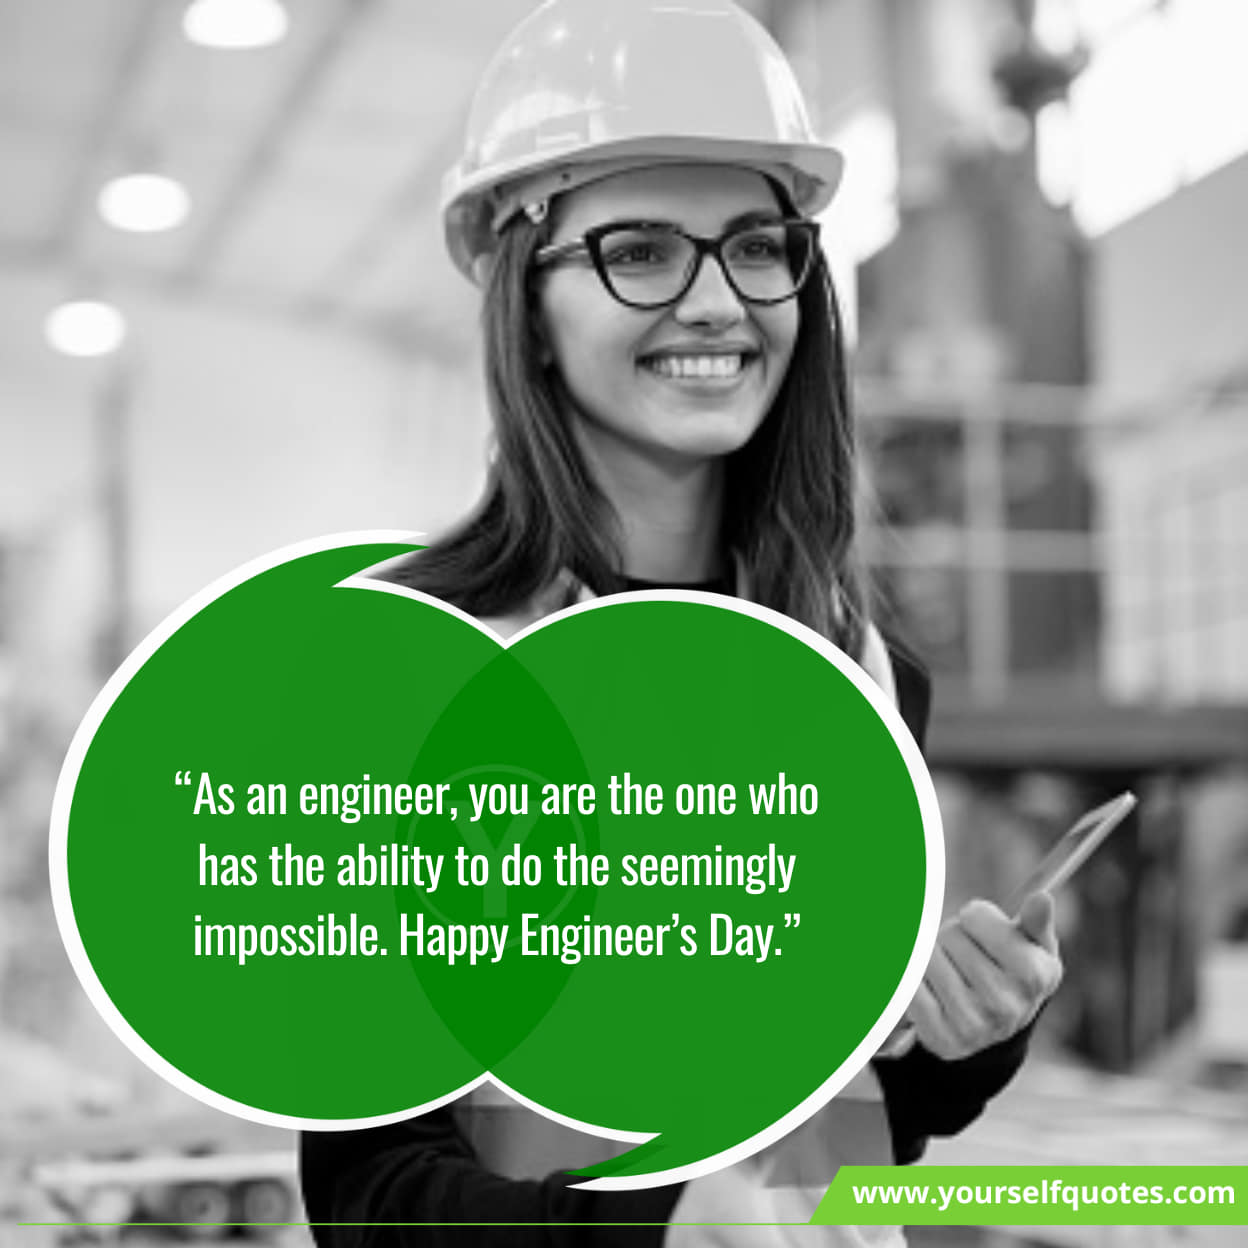 Encouraging Quotes On Happy Engineers Day